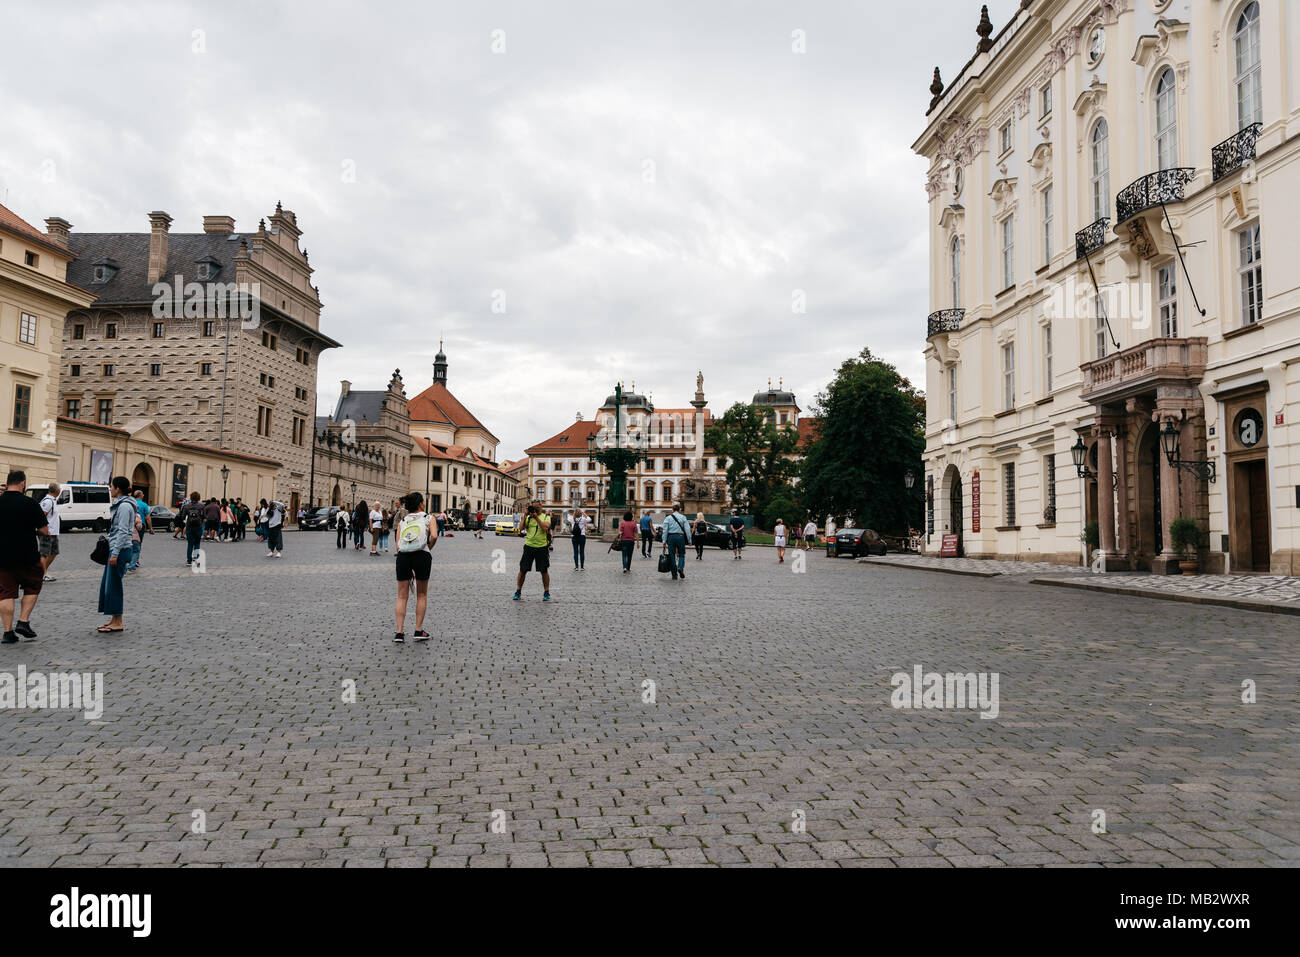 Prague,  Czech Republic - August 19, 2017: Tourists in Hradcany Square a cloudy day. It is located near Prague Castle and archdiocese building Stock Photo